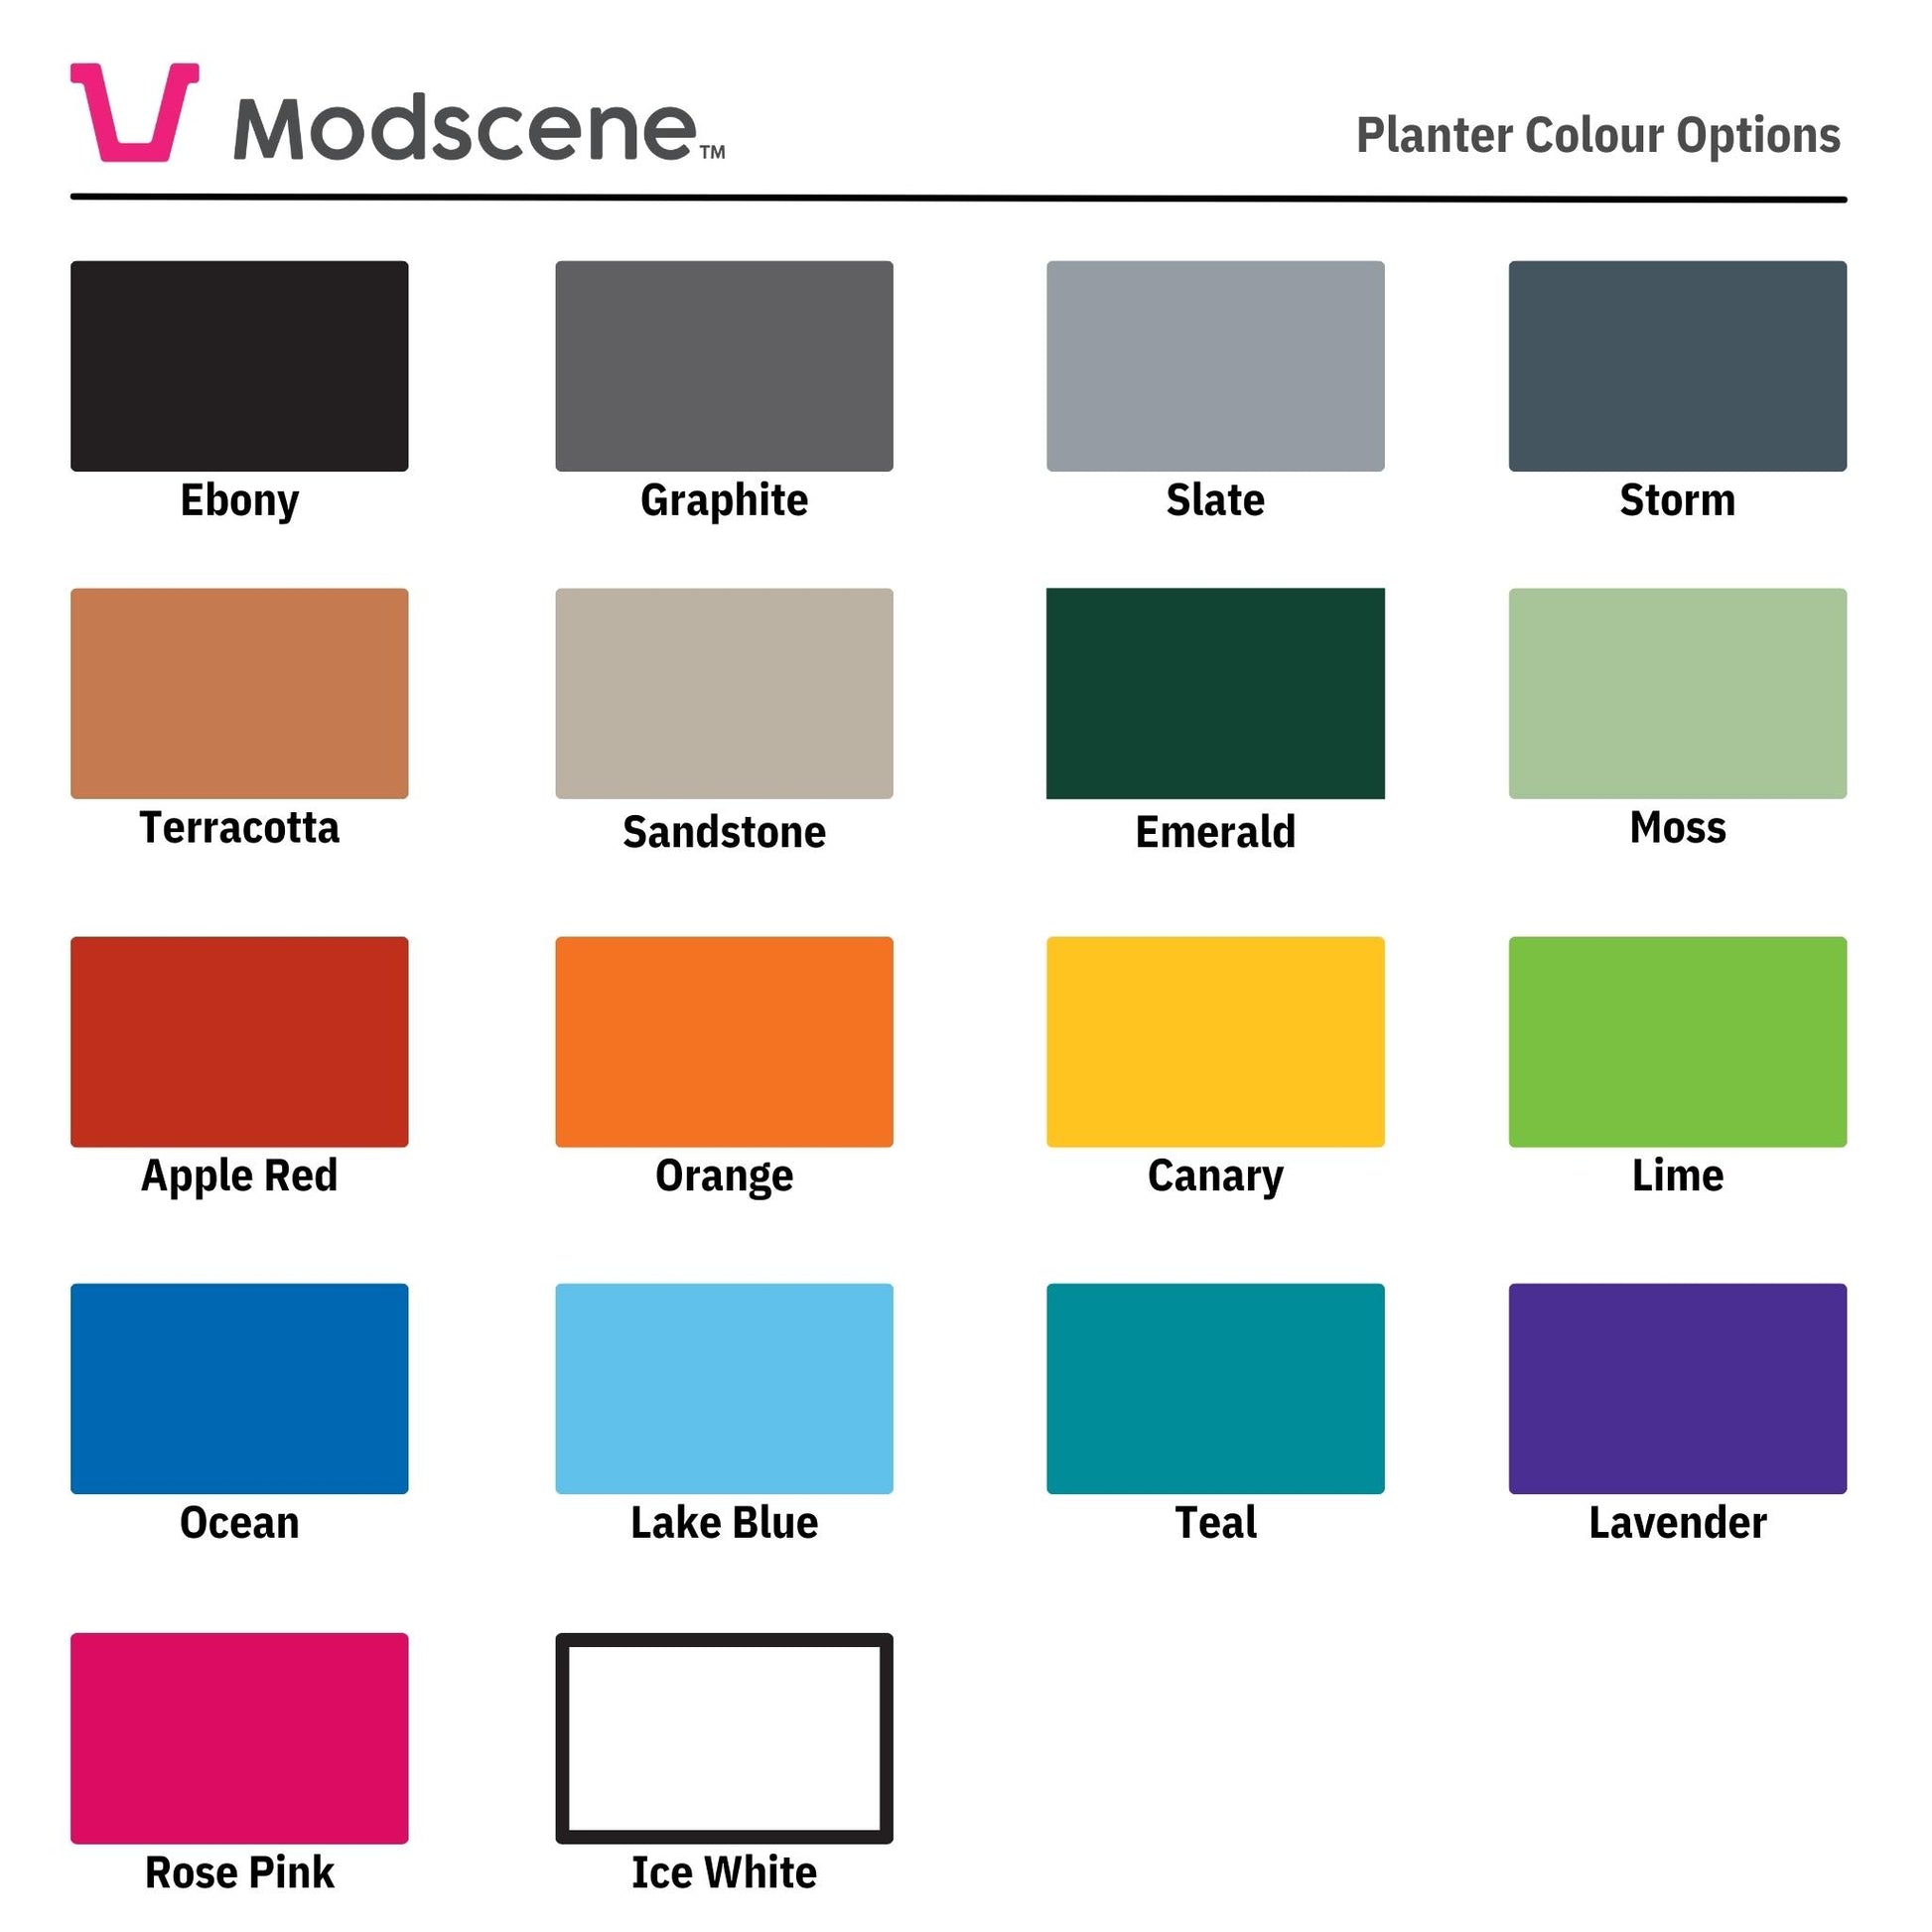 These are the Modscene planter pot colour options.